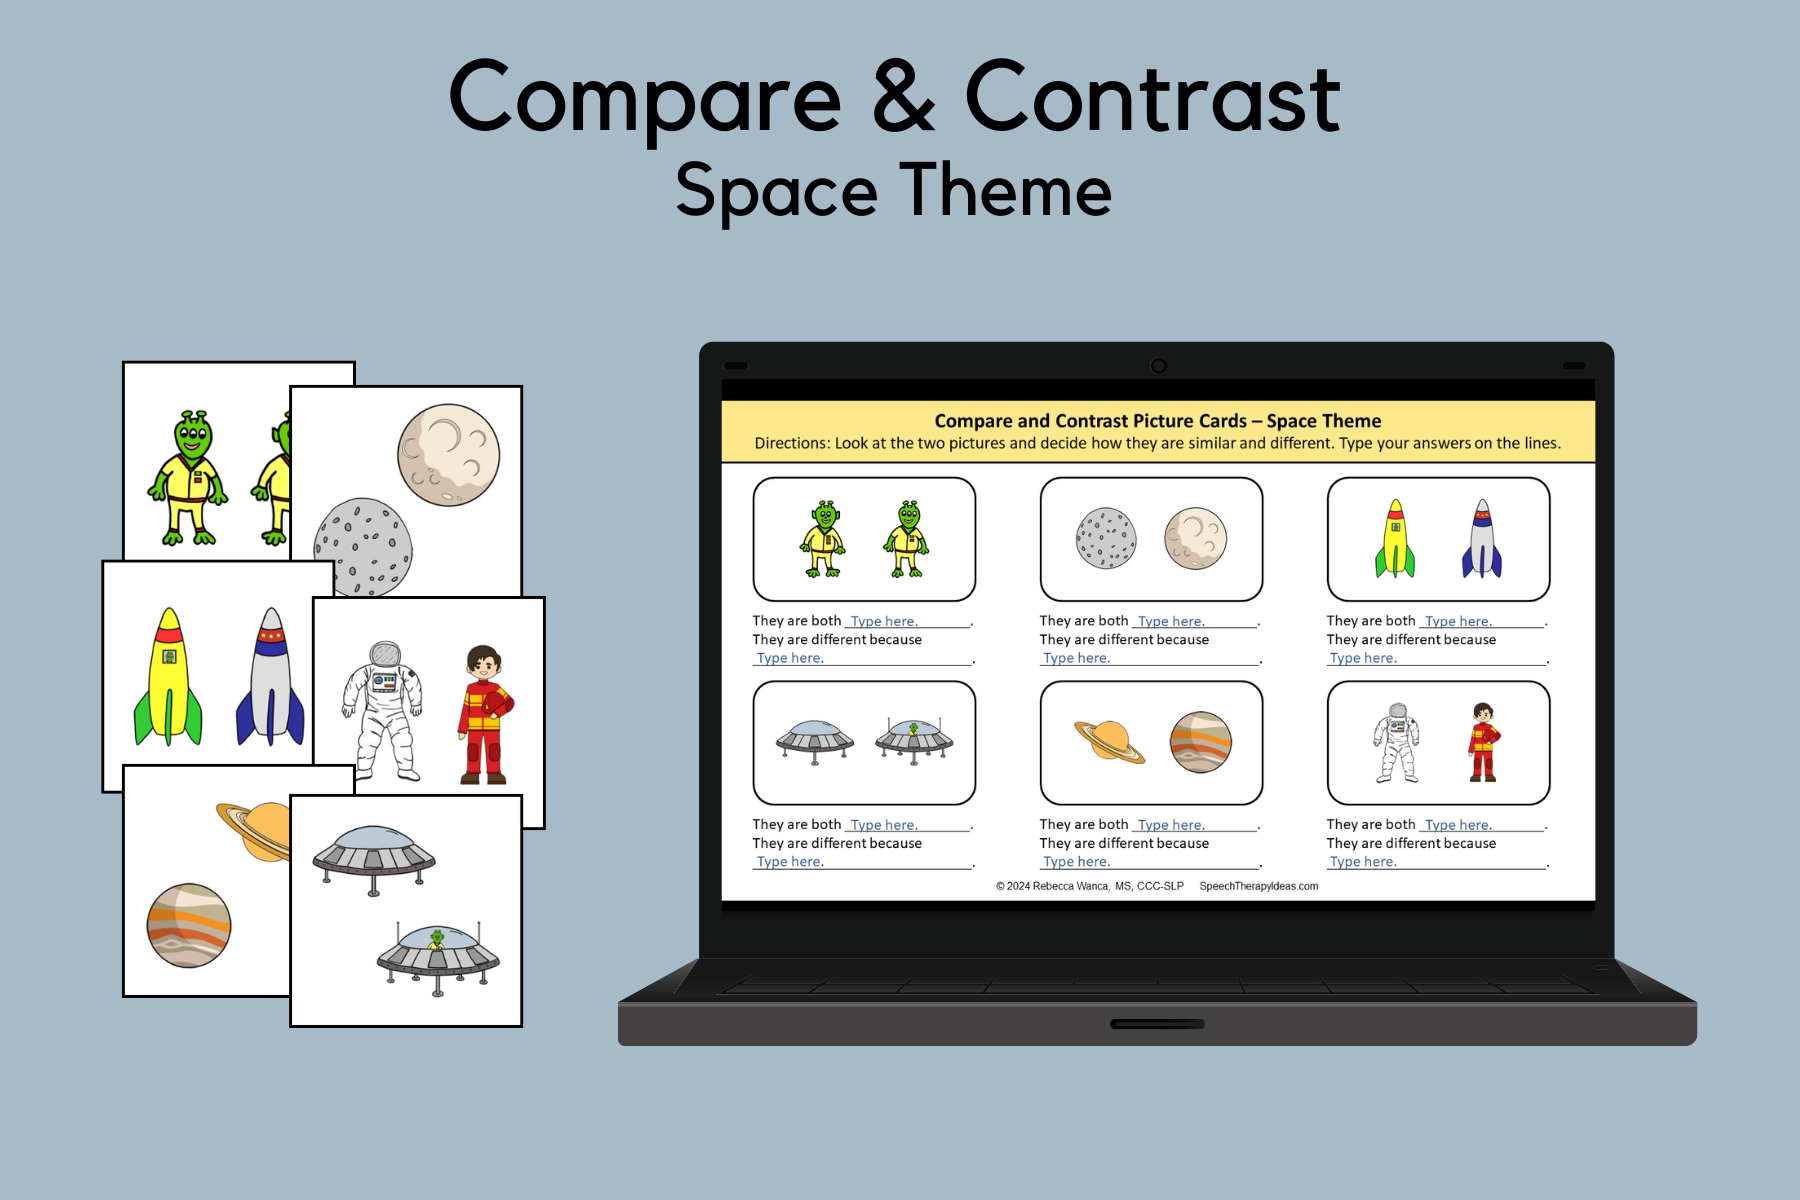 Compare and Contrast – Space Theme